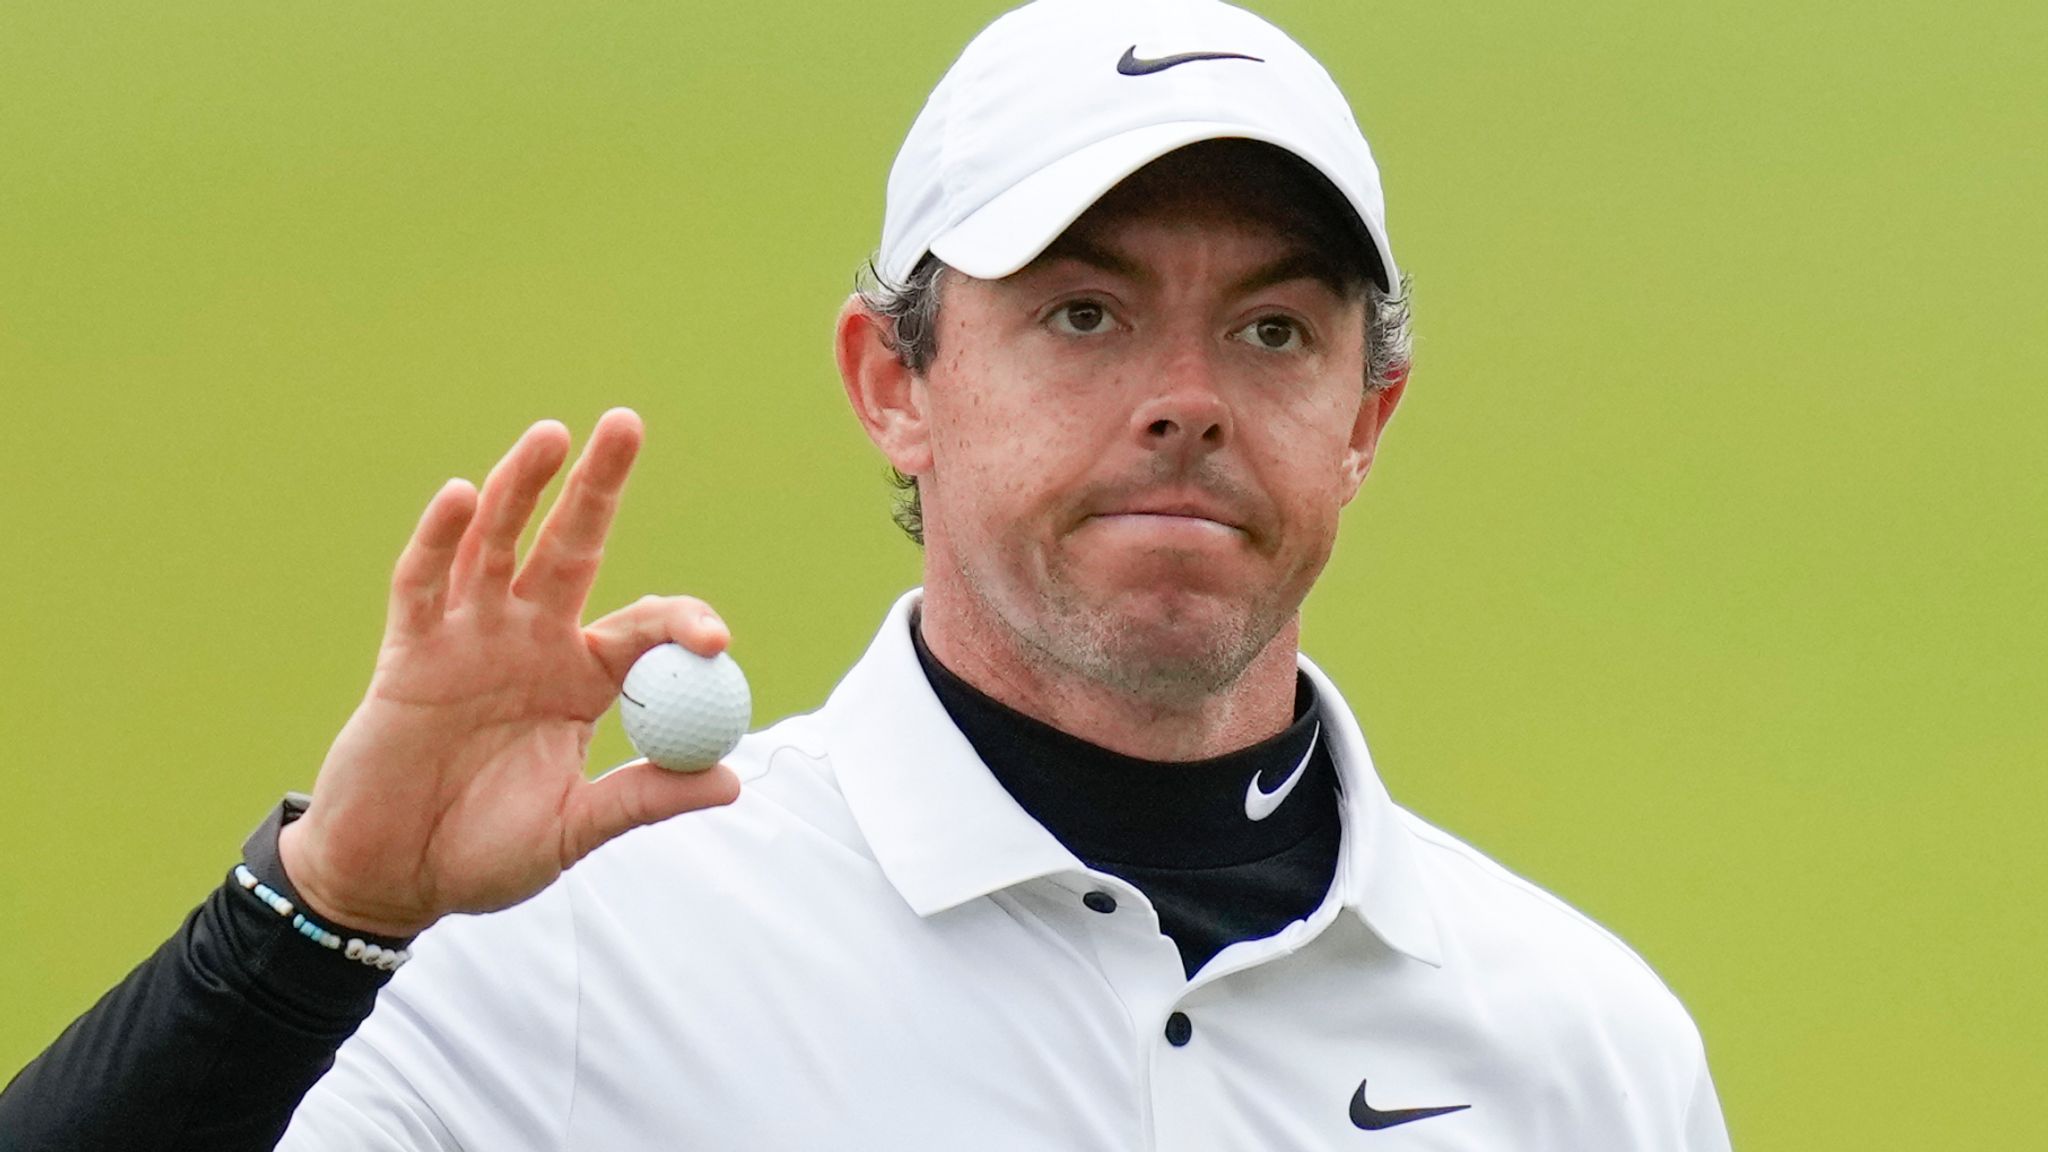 Rory McIlroy Claims Fourth Major Victory at the Masters Tournament